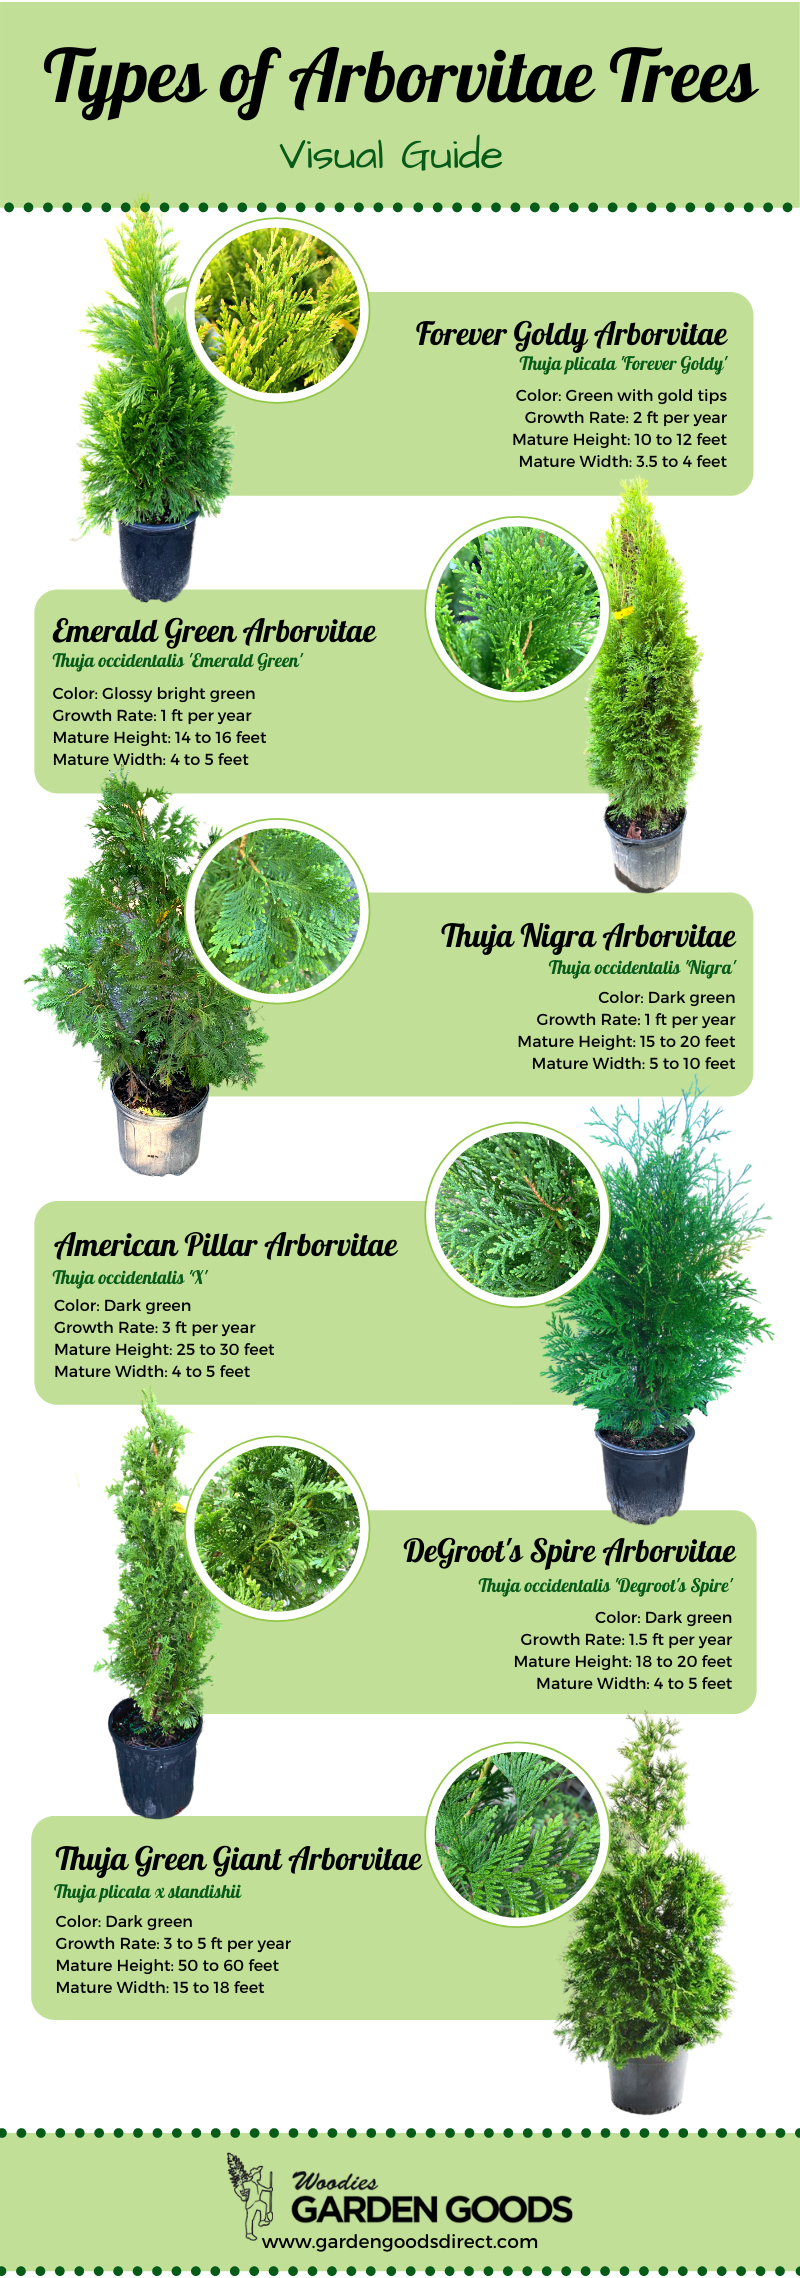 How to Plant Arborvitae Trees Plant Guide Garden Goods Direct